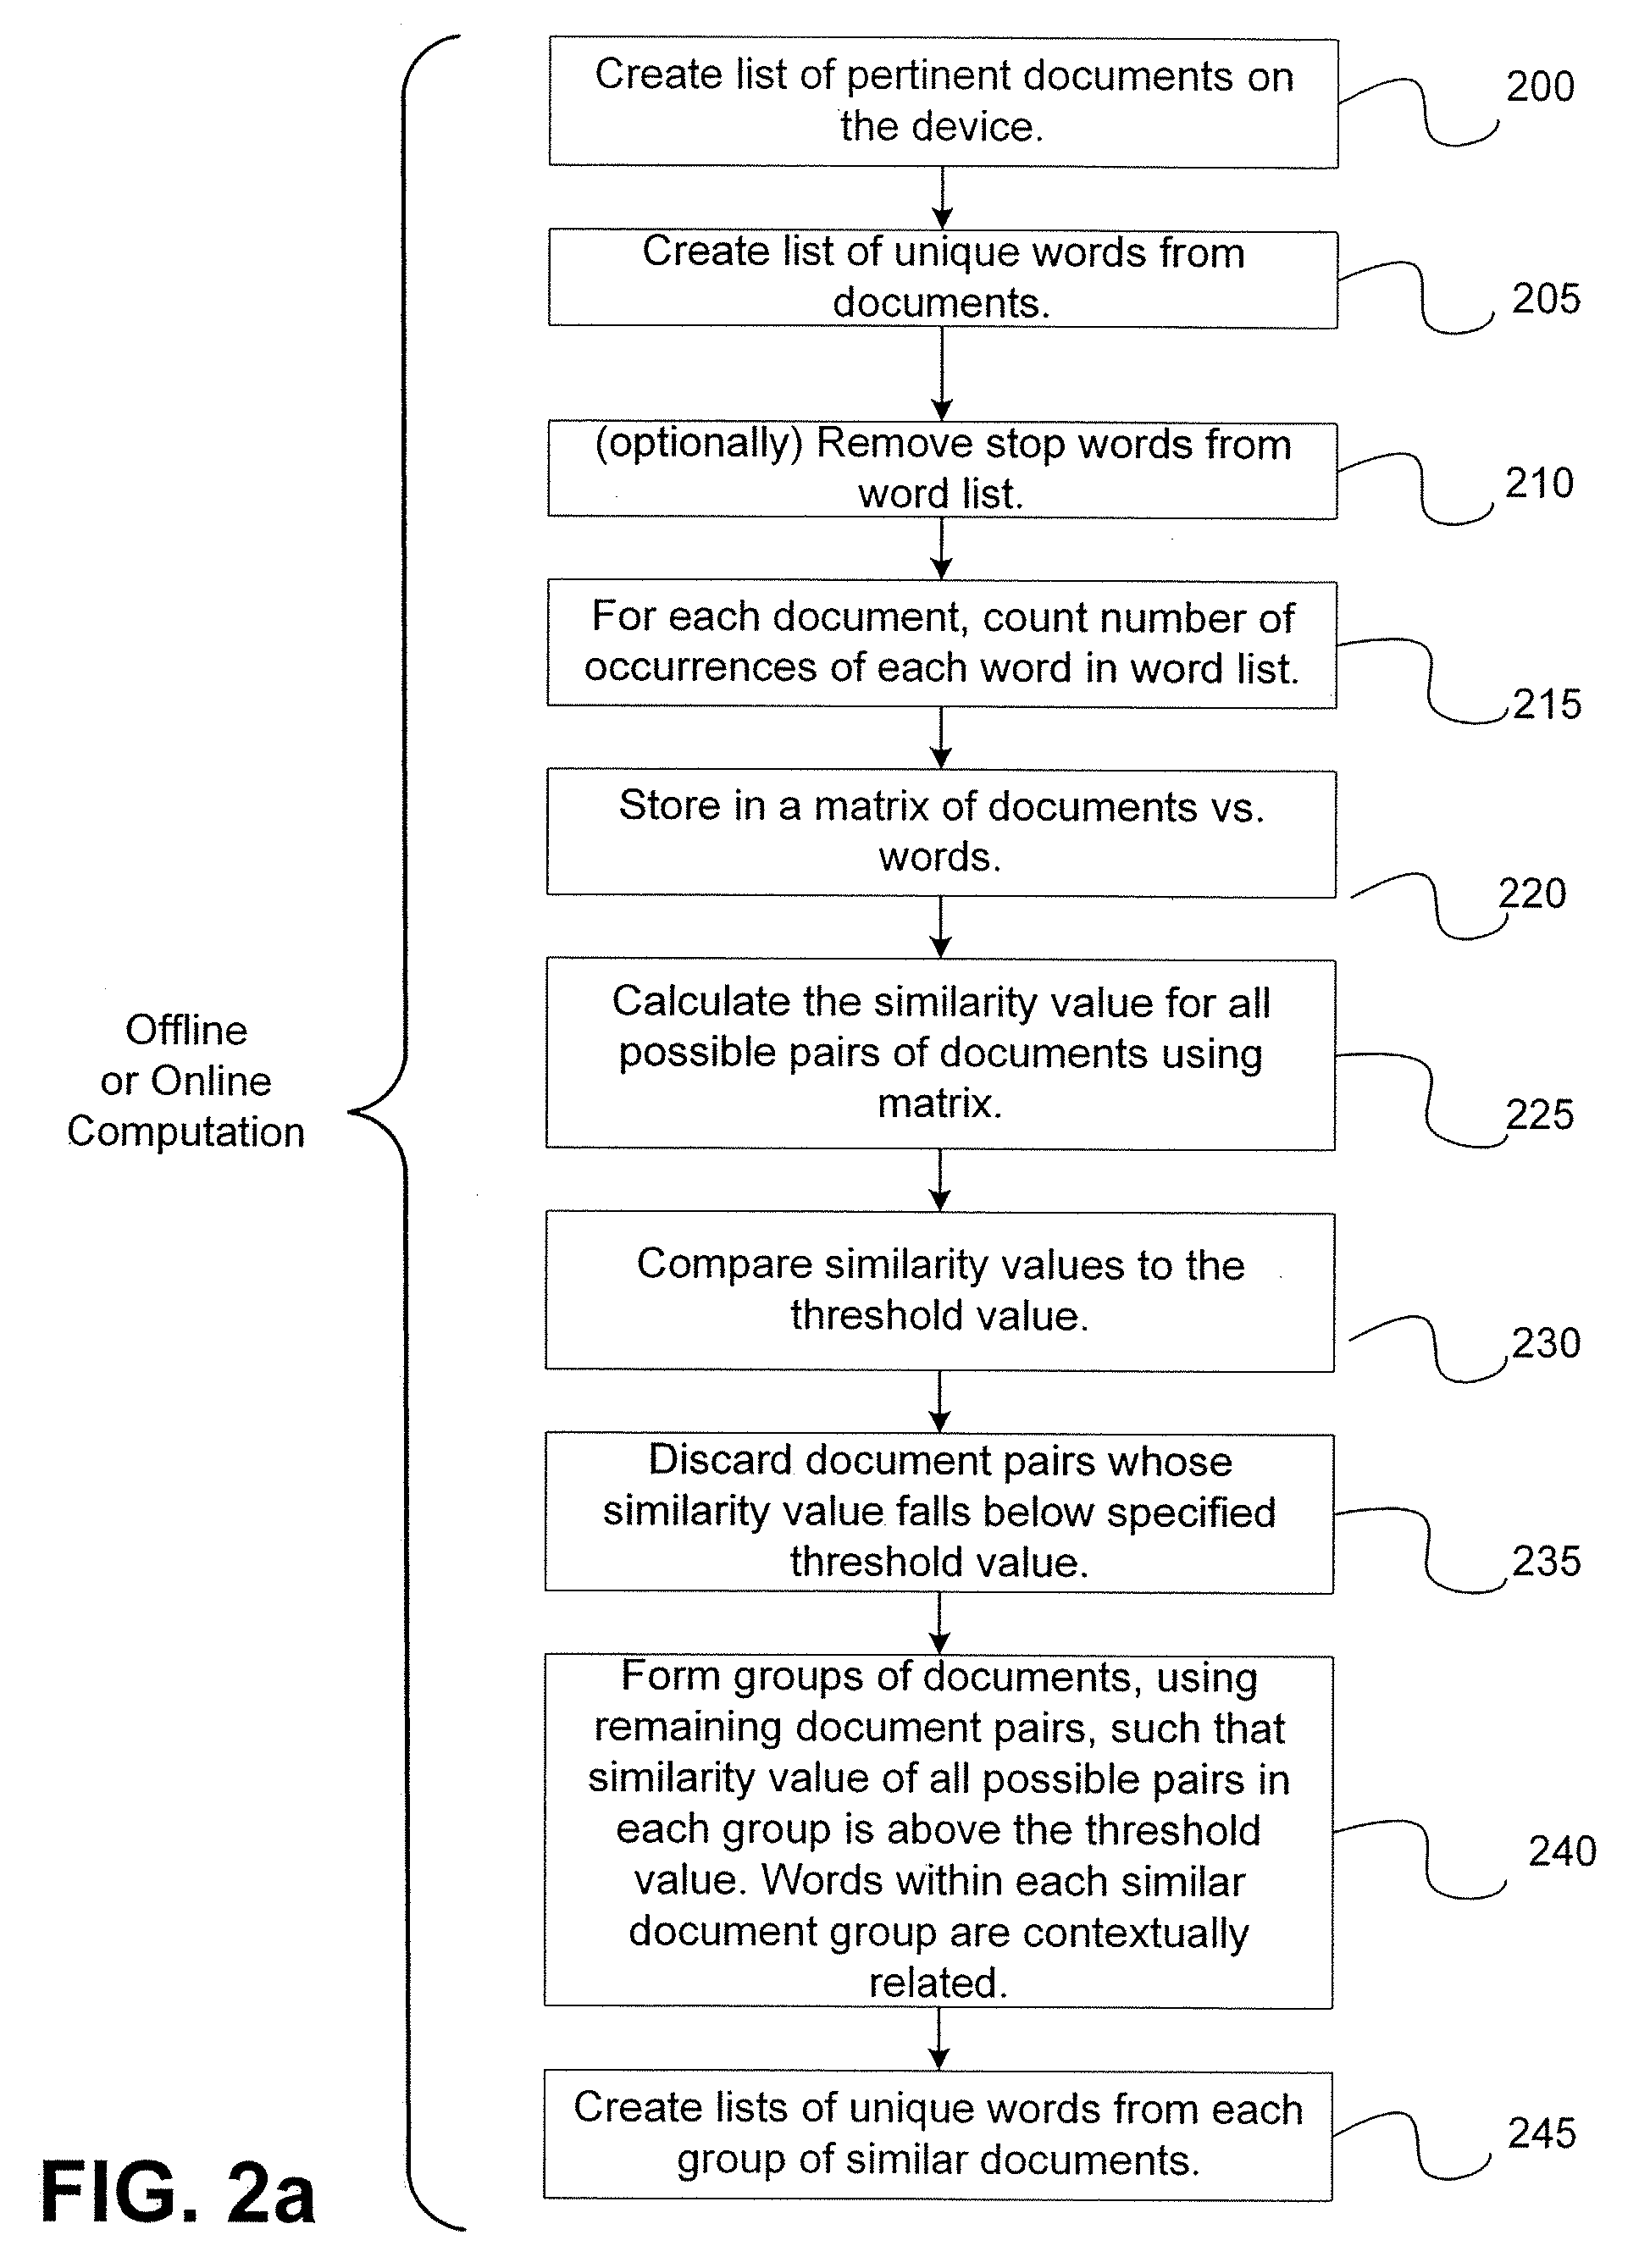 Automatic dynamic contextual data entry completion system